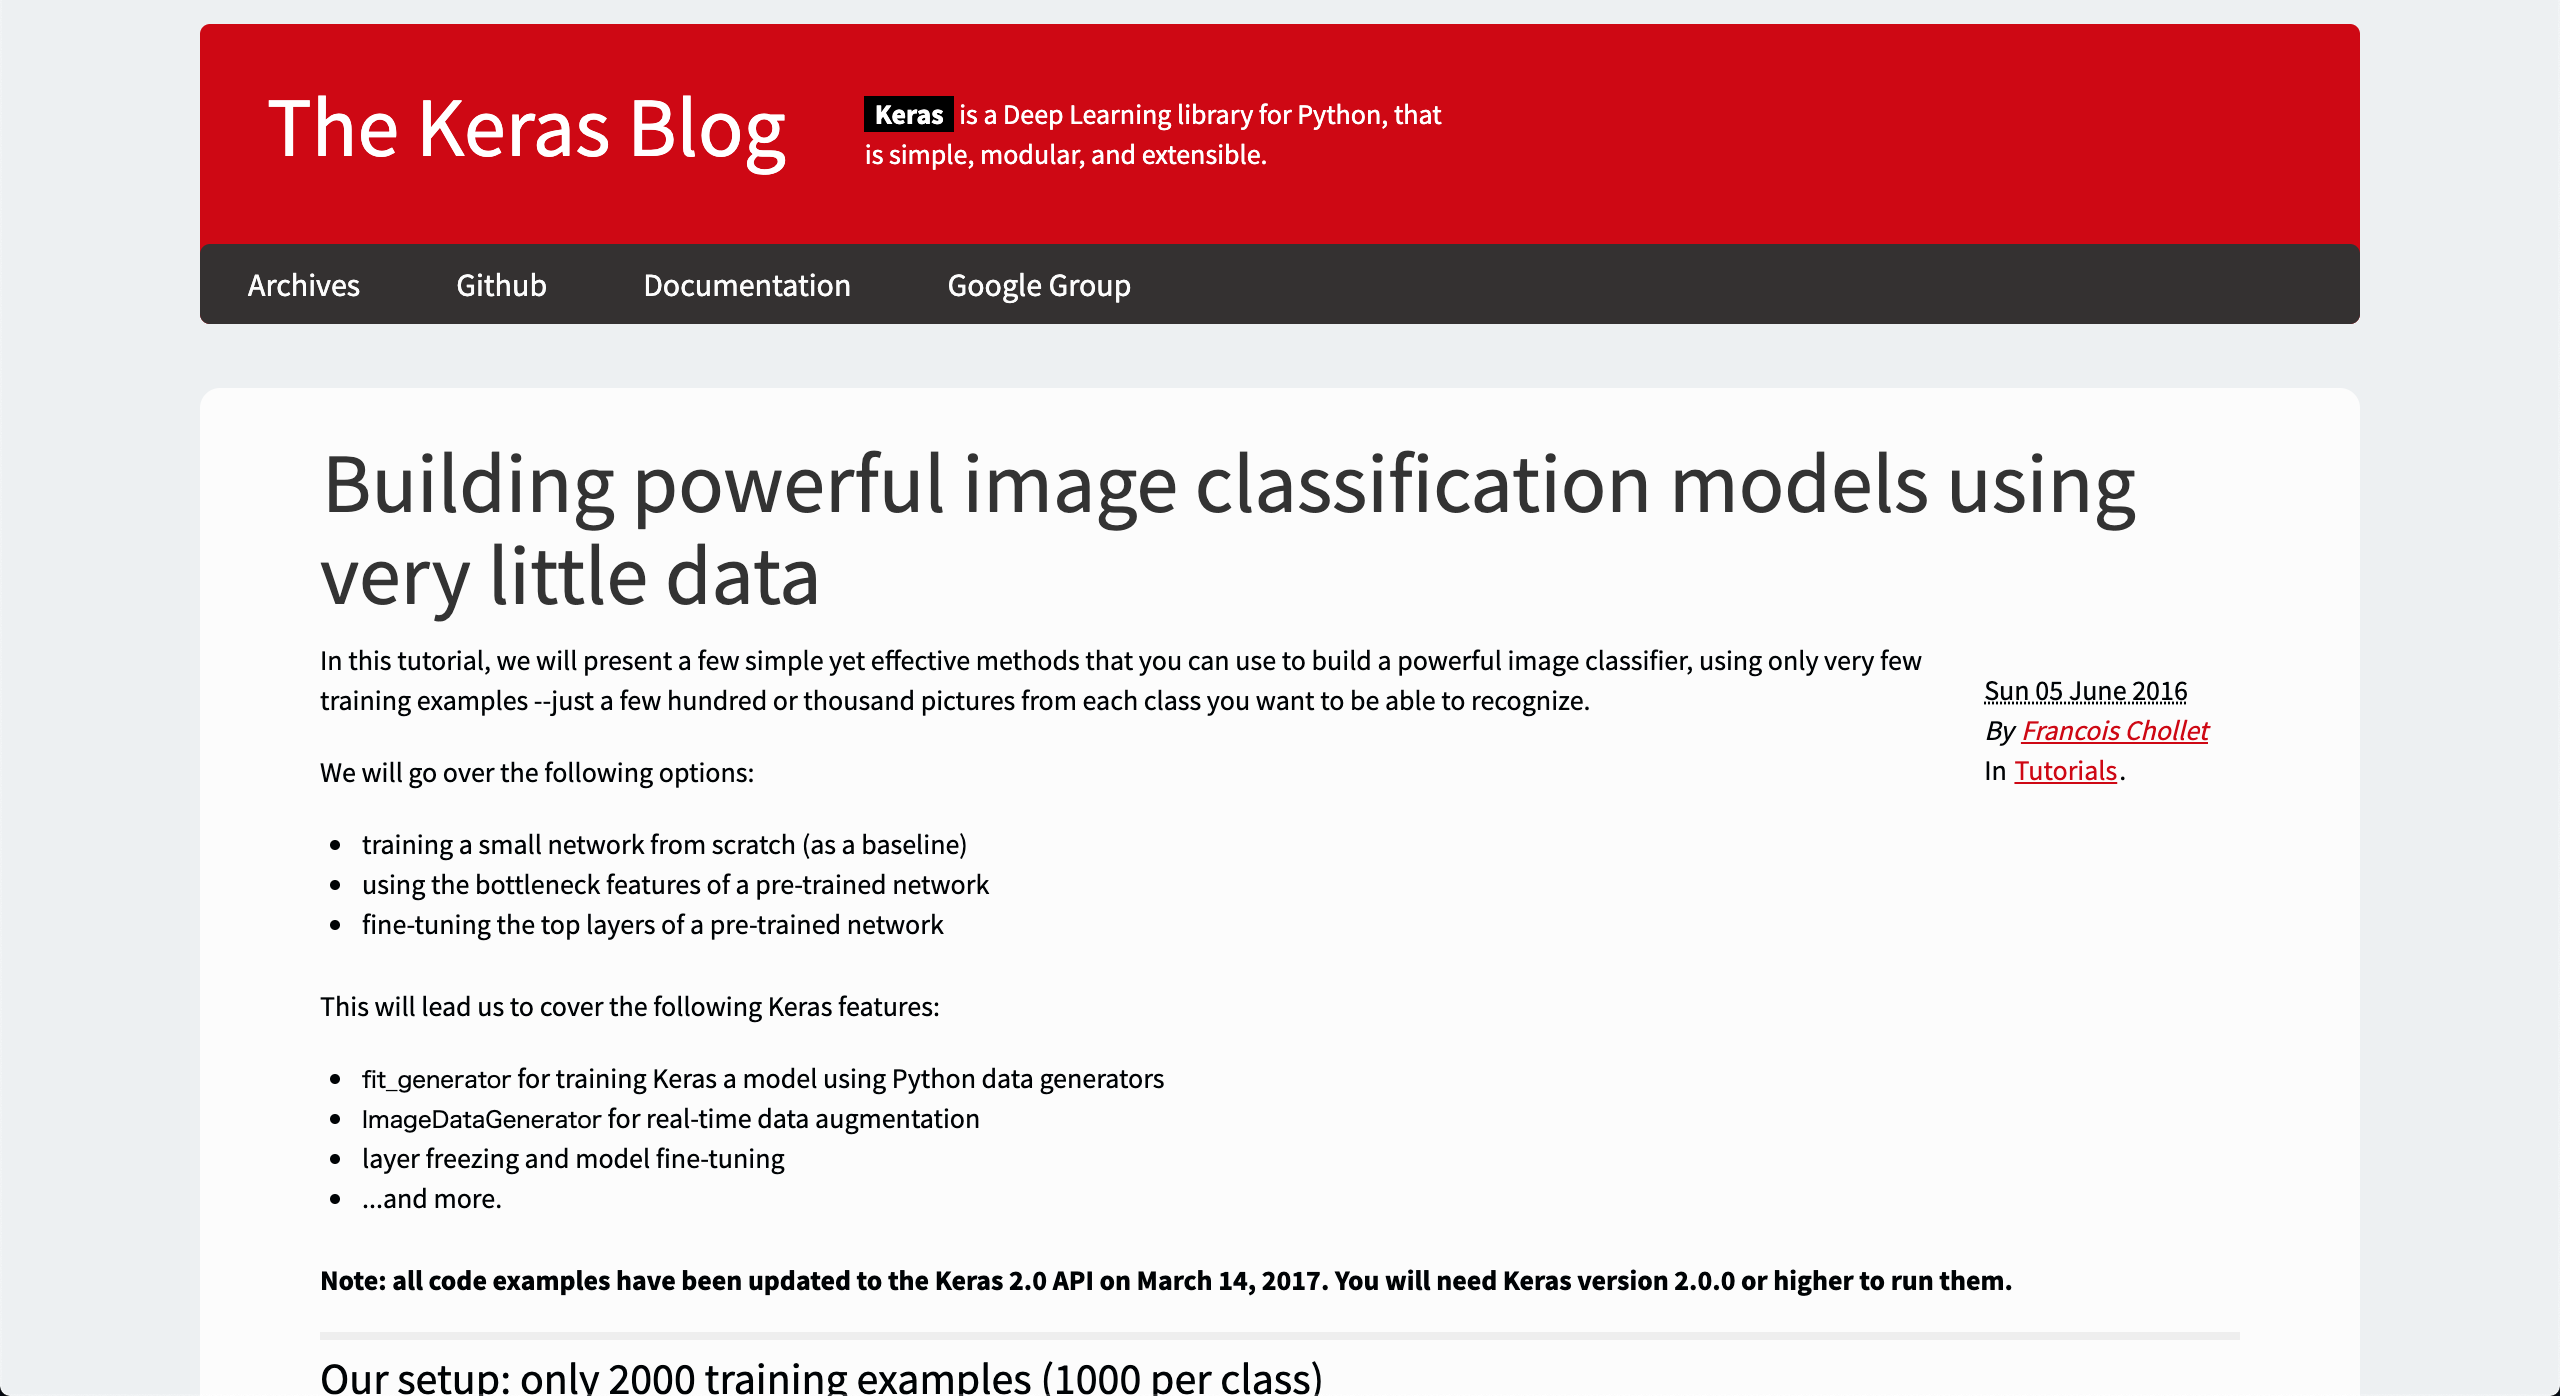 Building powerful image classification models using very little data